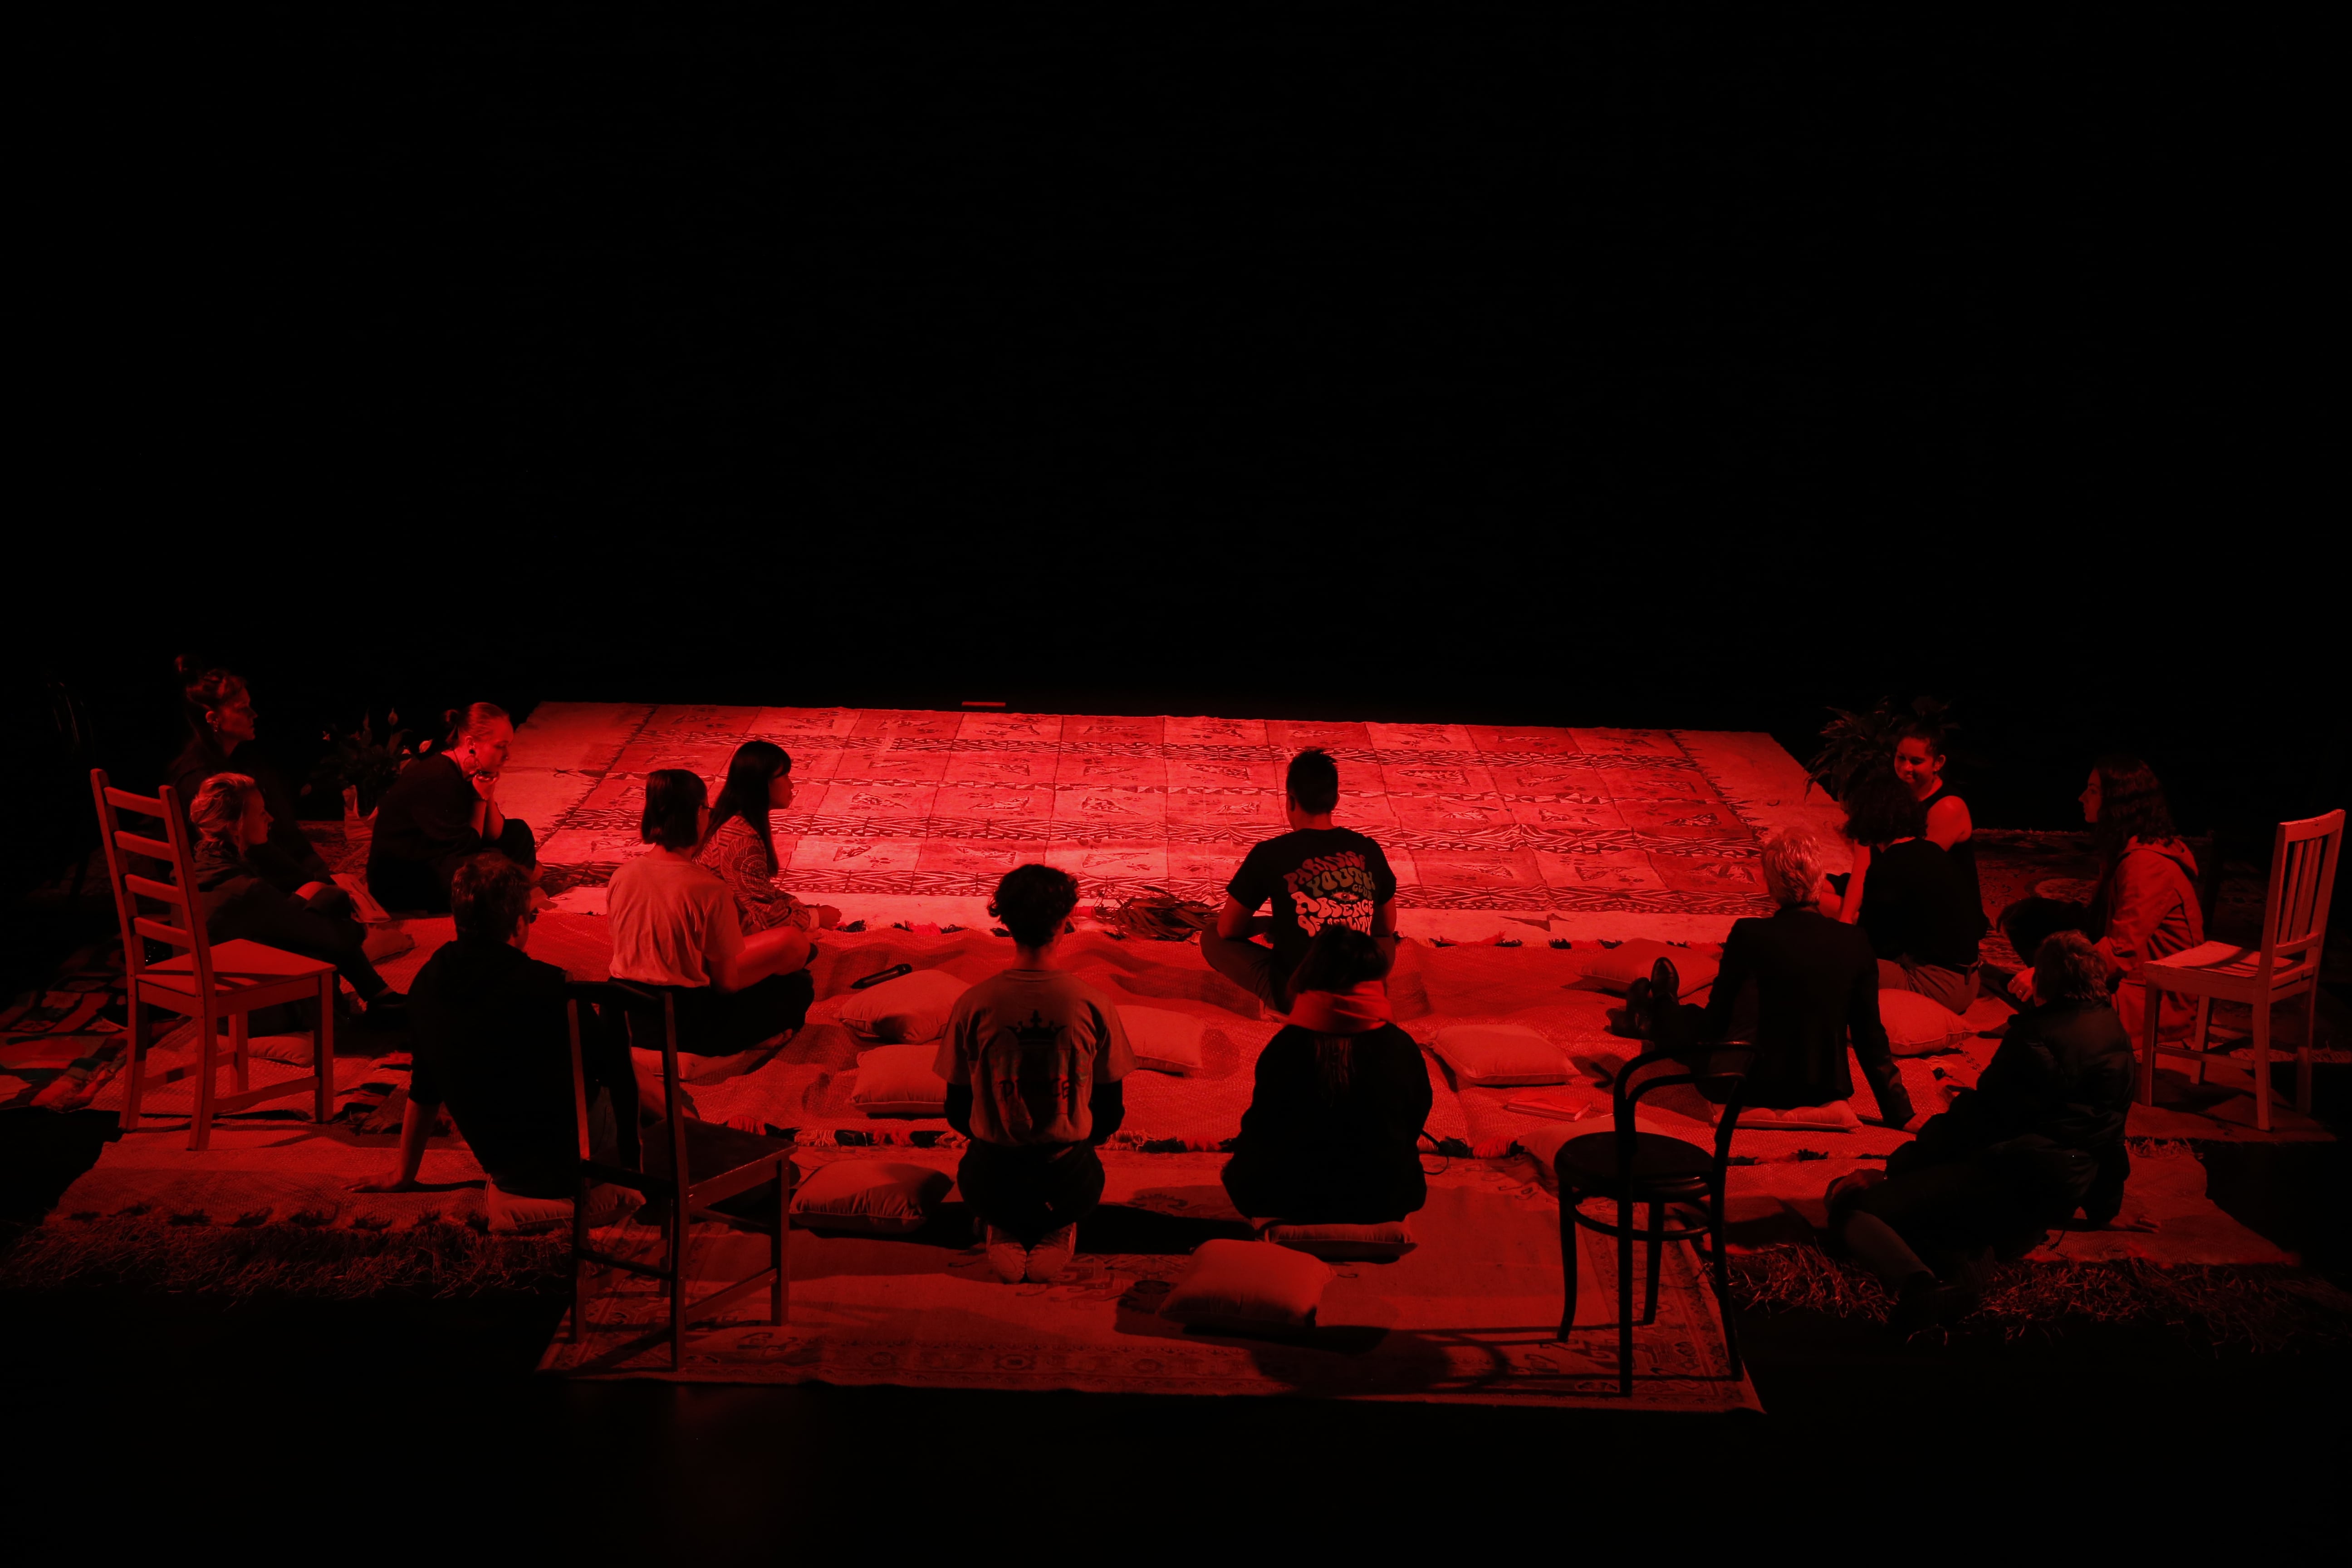 Image 02: Indigenous and People of Colour audience in Where We Stand, June 2018, Victorian College of the Arts, choreographed by Isabella Whāwhai Mason. Photo: Jeff Busby.